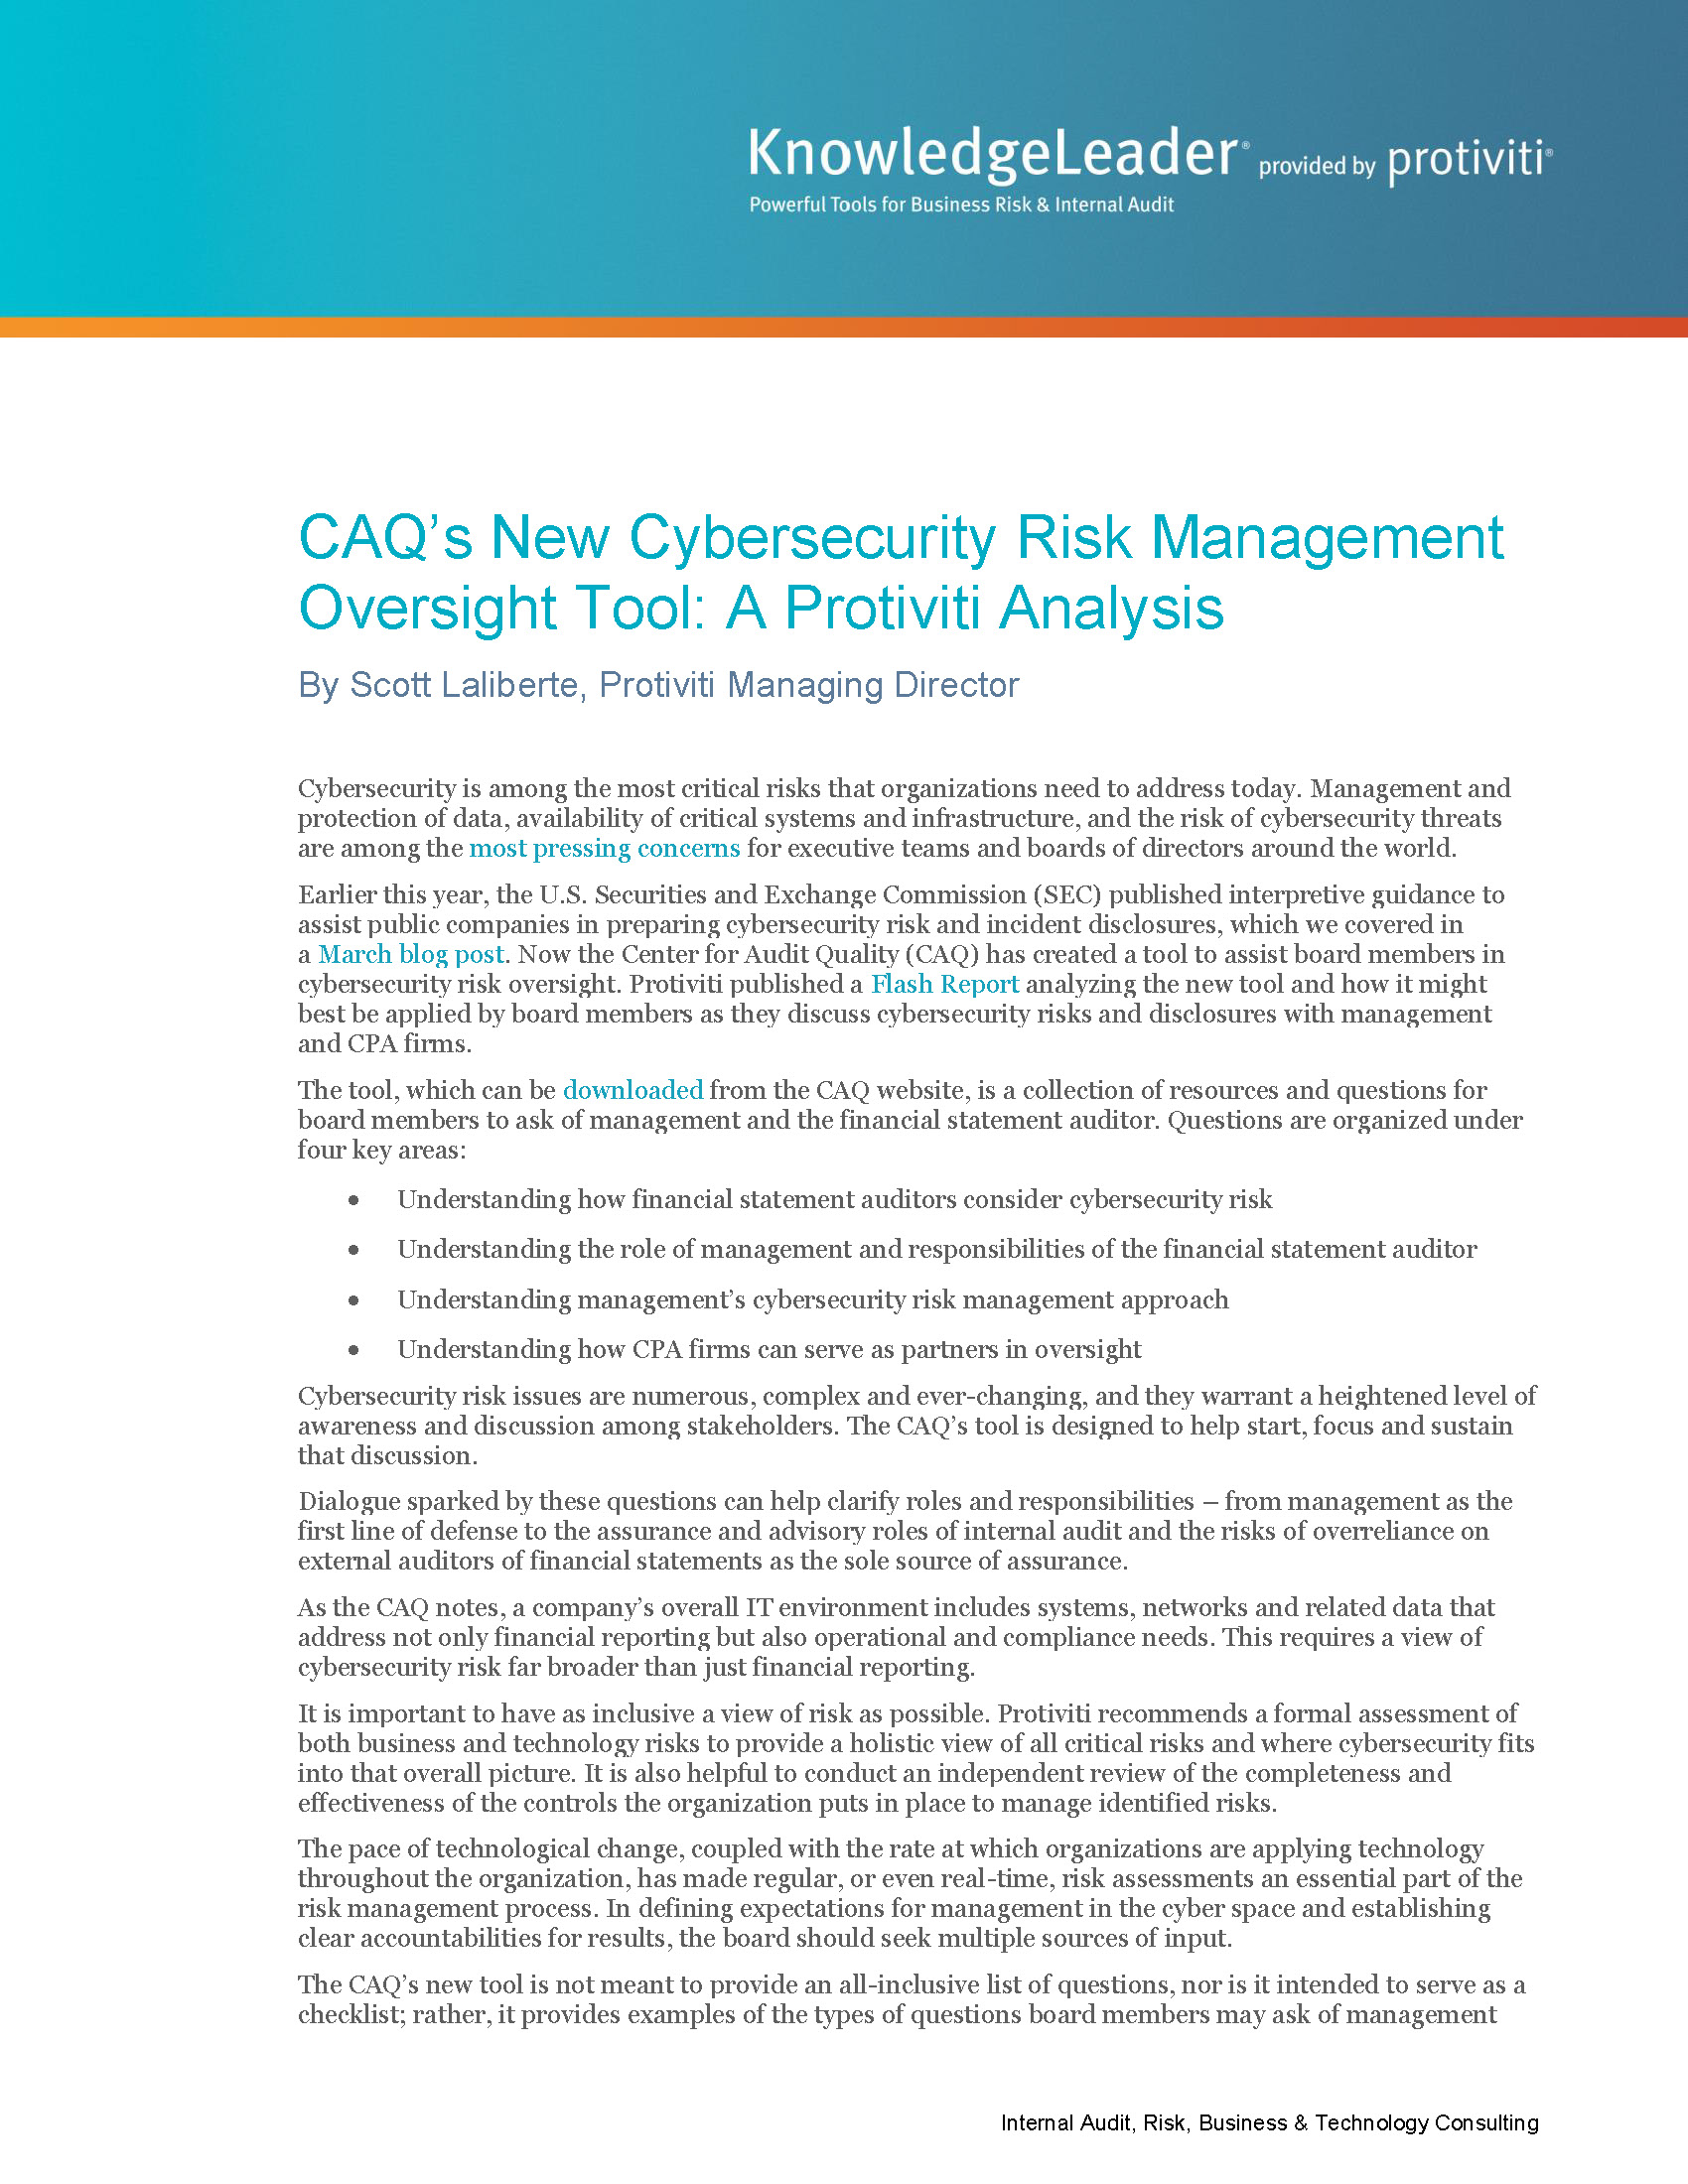 Screenshot of the first page of CAQ’s New Cybersecurity Risk Management Oversight Tool: A Protiviti Analysis